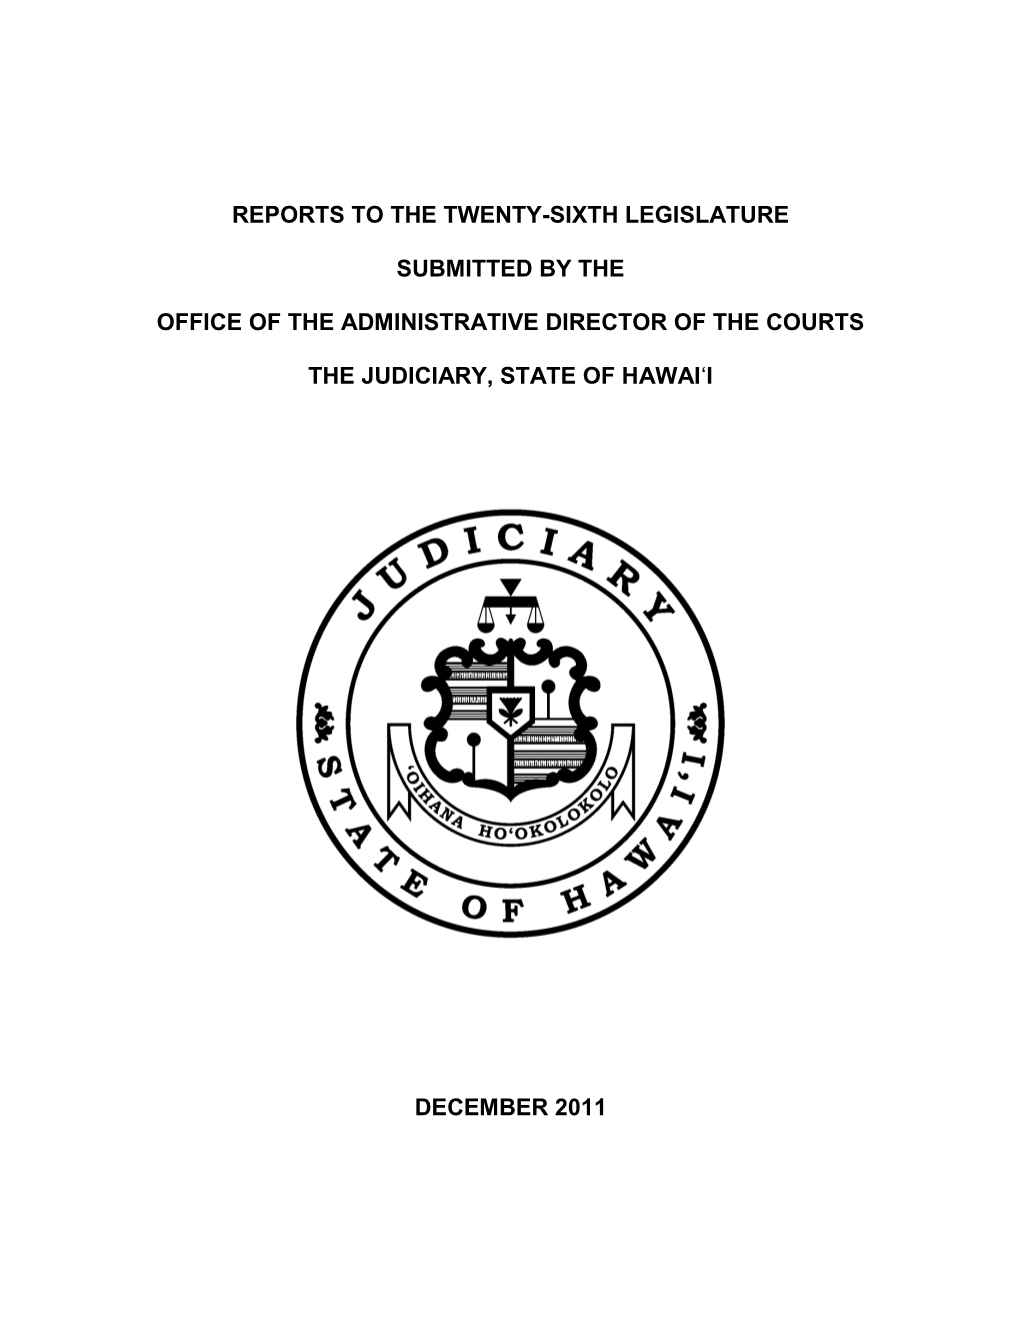 Reports to the Twenty-Sixth Legislature Submitted by the Office of the Administrative Director of the Courts the Judiciary